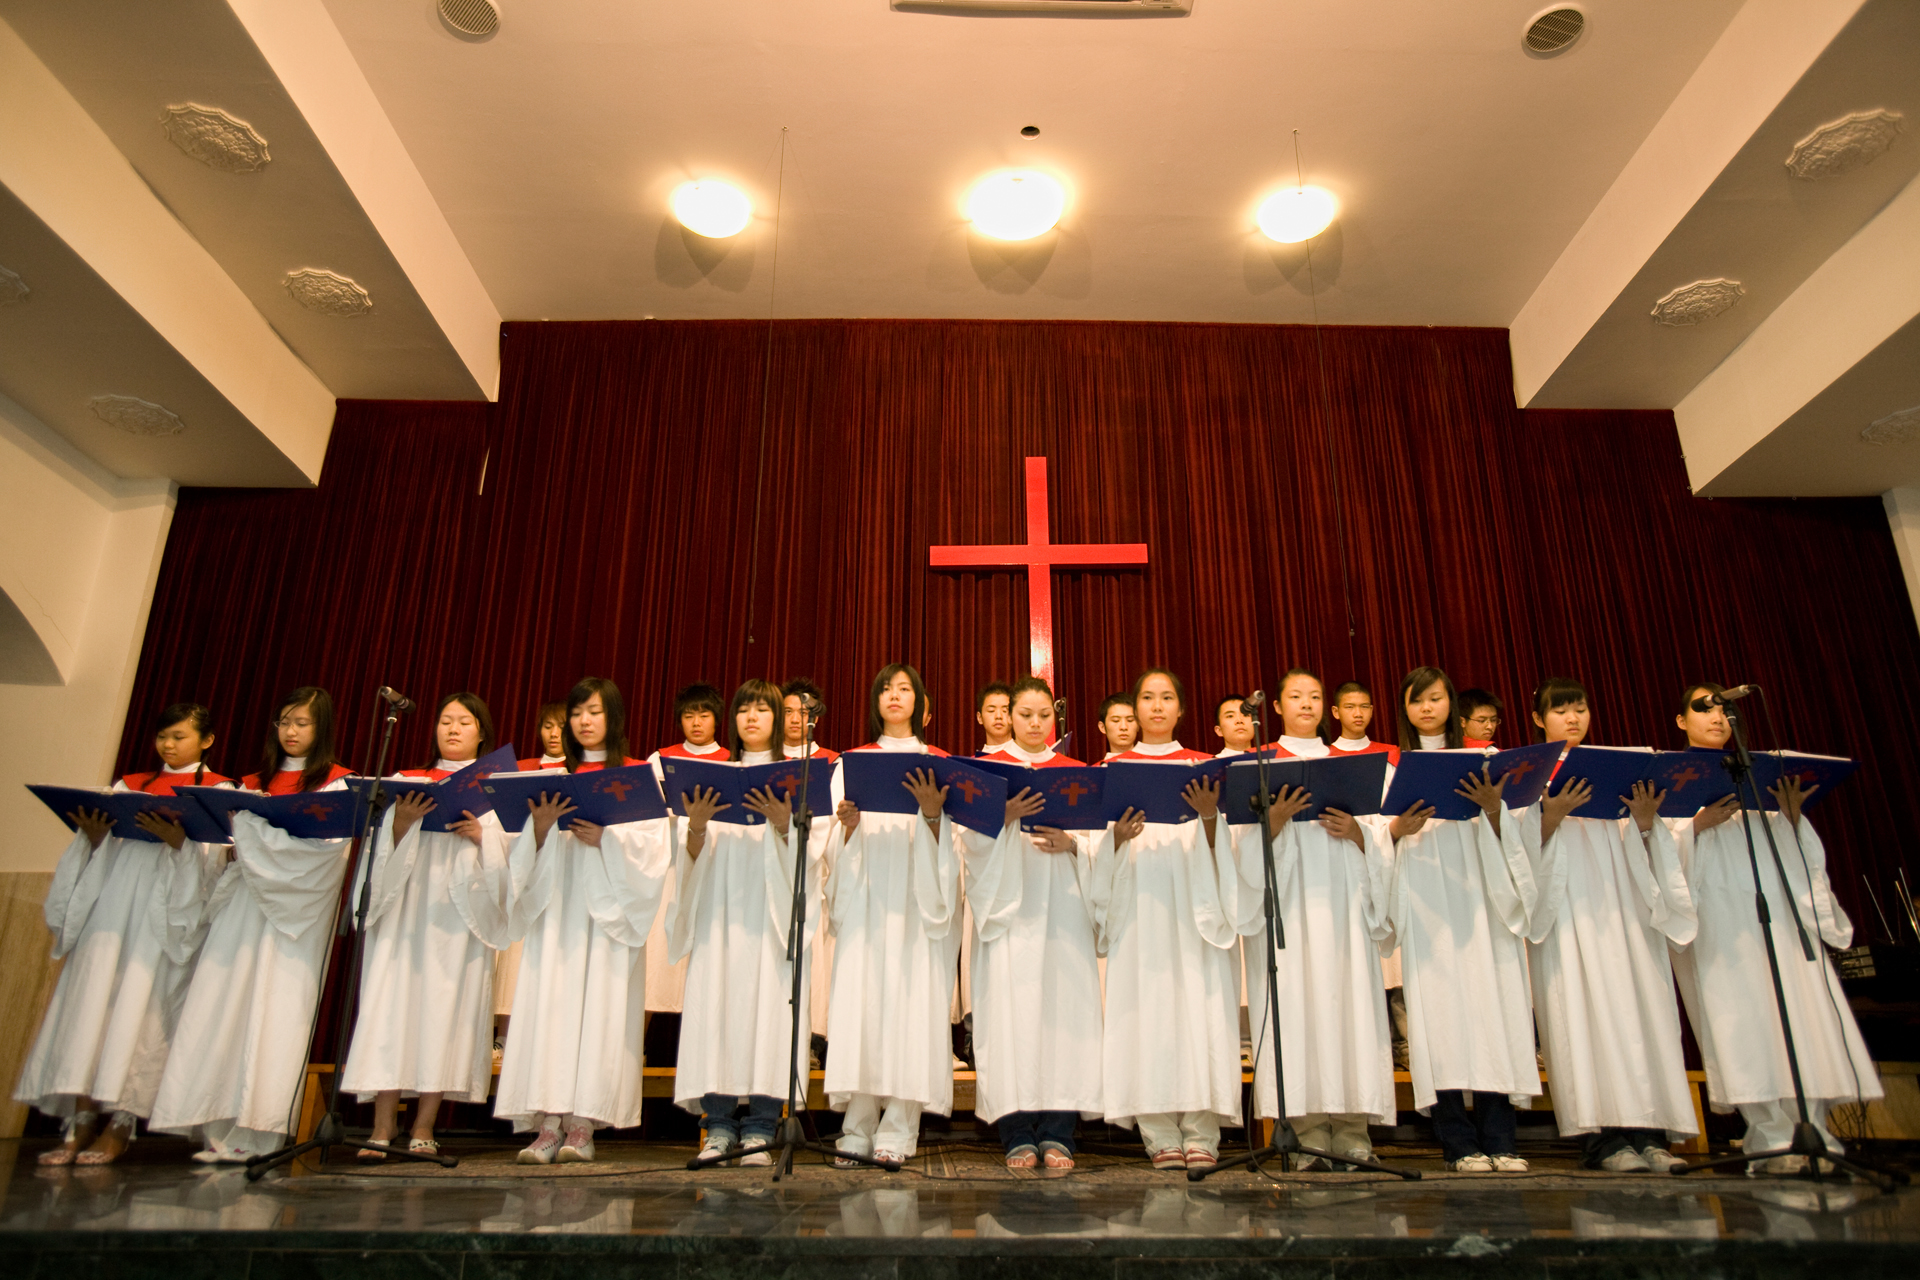  Chinese parishioners gather for service, including choir performances, at a Christian church in Prato. 